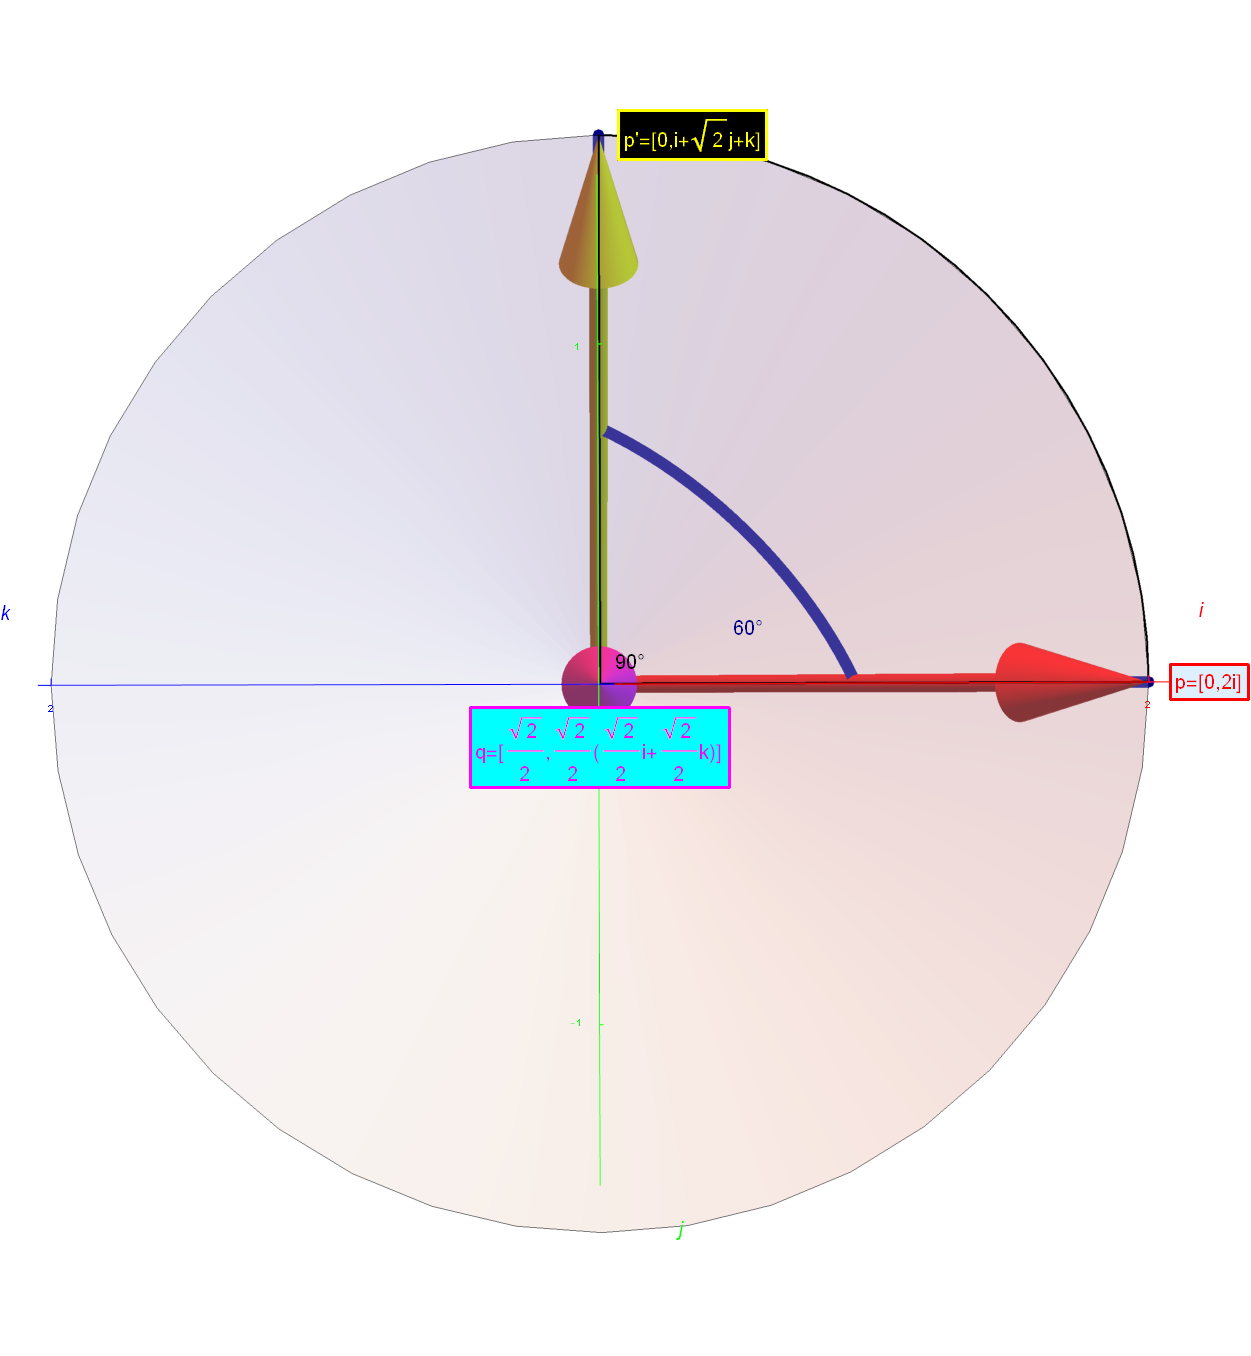 The quaternion rotation visualized from the axis of rotation.